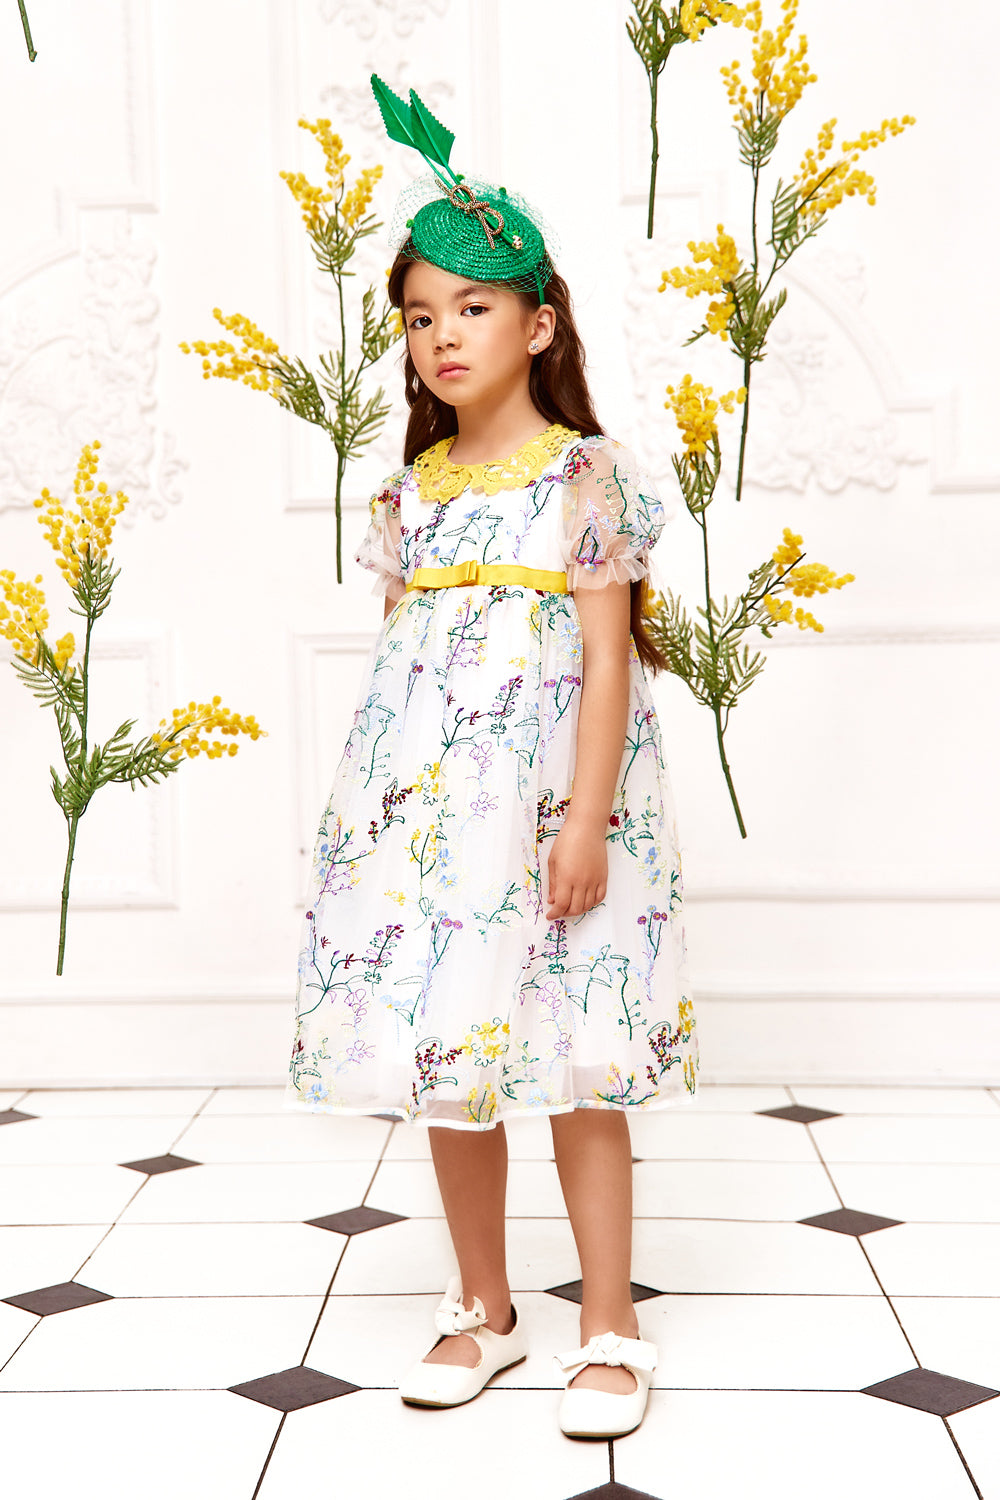 White floral embroidered lace dress with yellow hand-made cotton collar and grossgrain ribbon